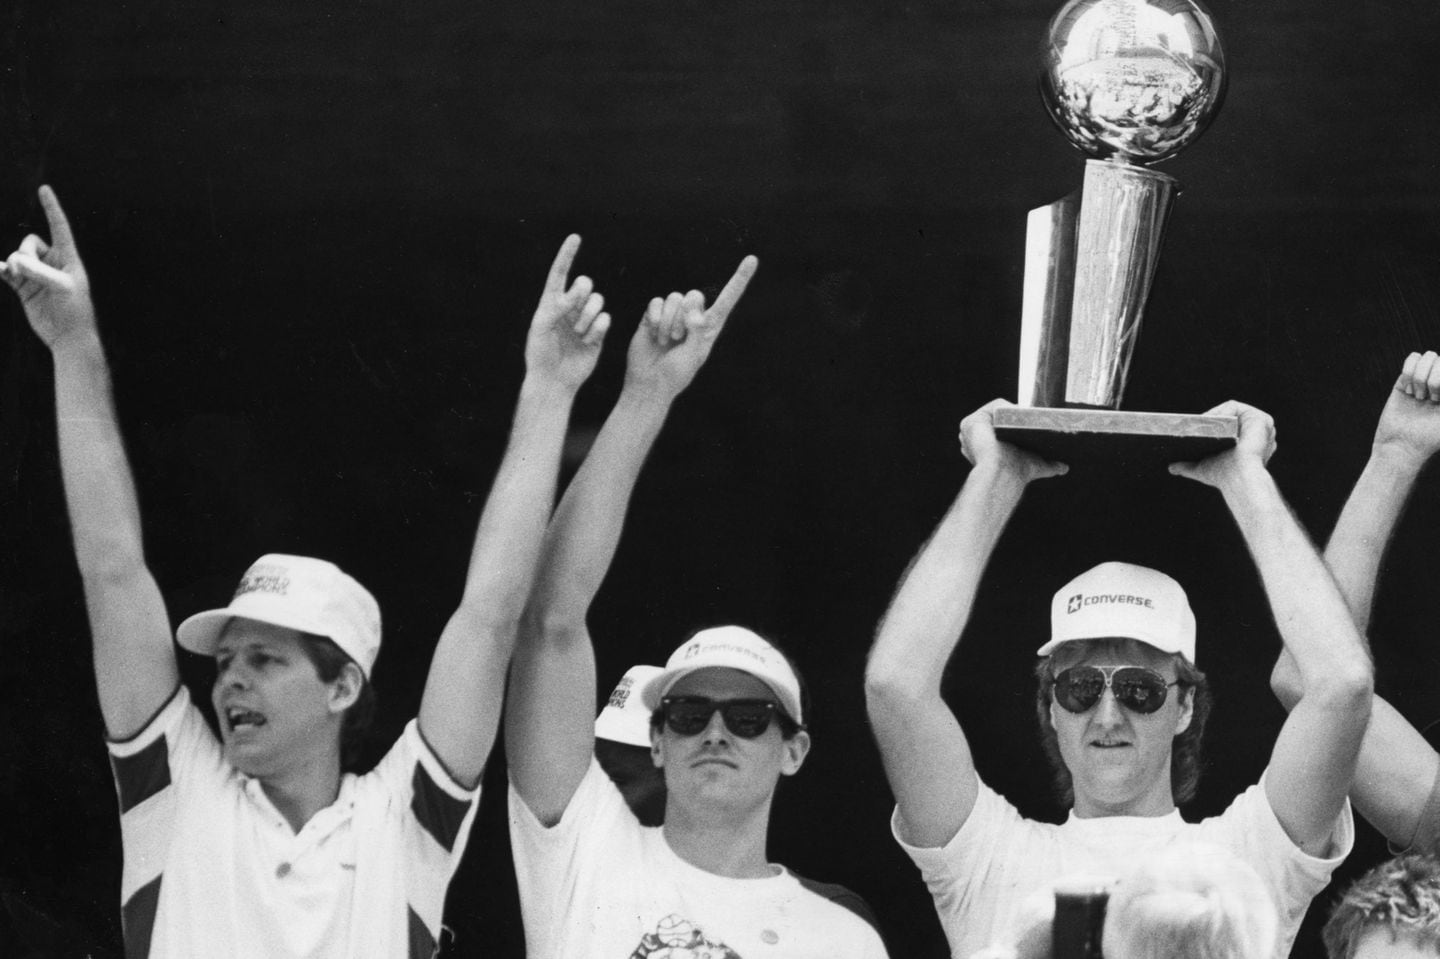 Rick Carlisle (center) was flanked by Danny Ainge (left) and Larry Bird (right) at a City Hall Plaza celebration honoring the 1986 champion Celtics.